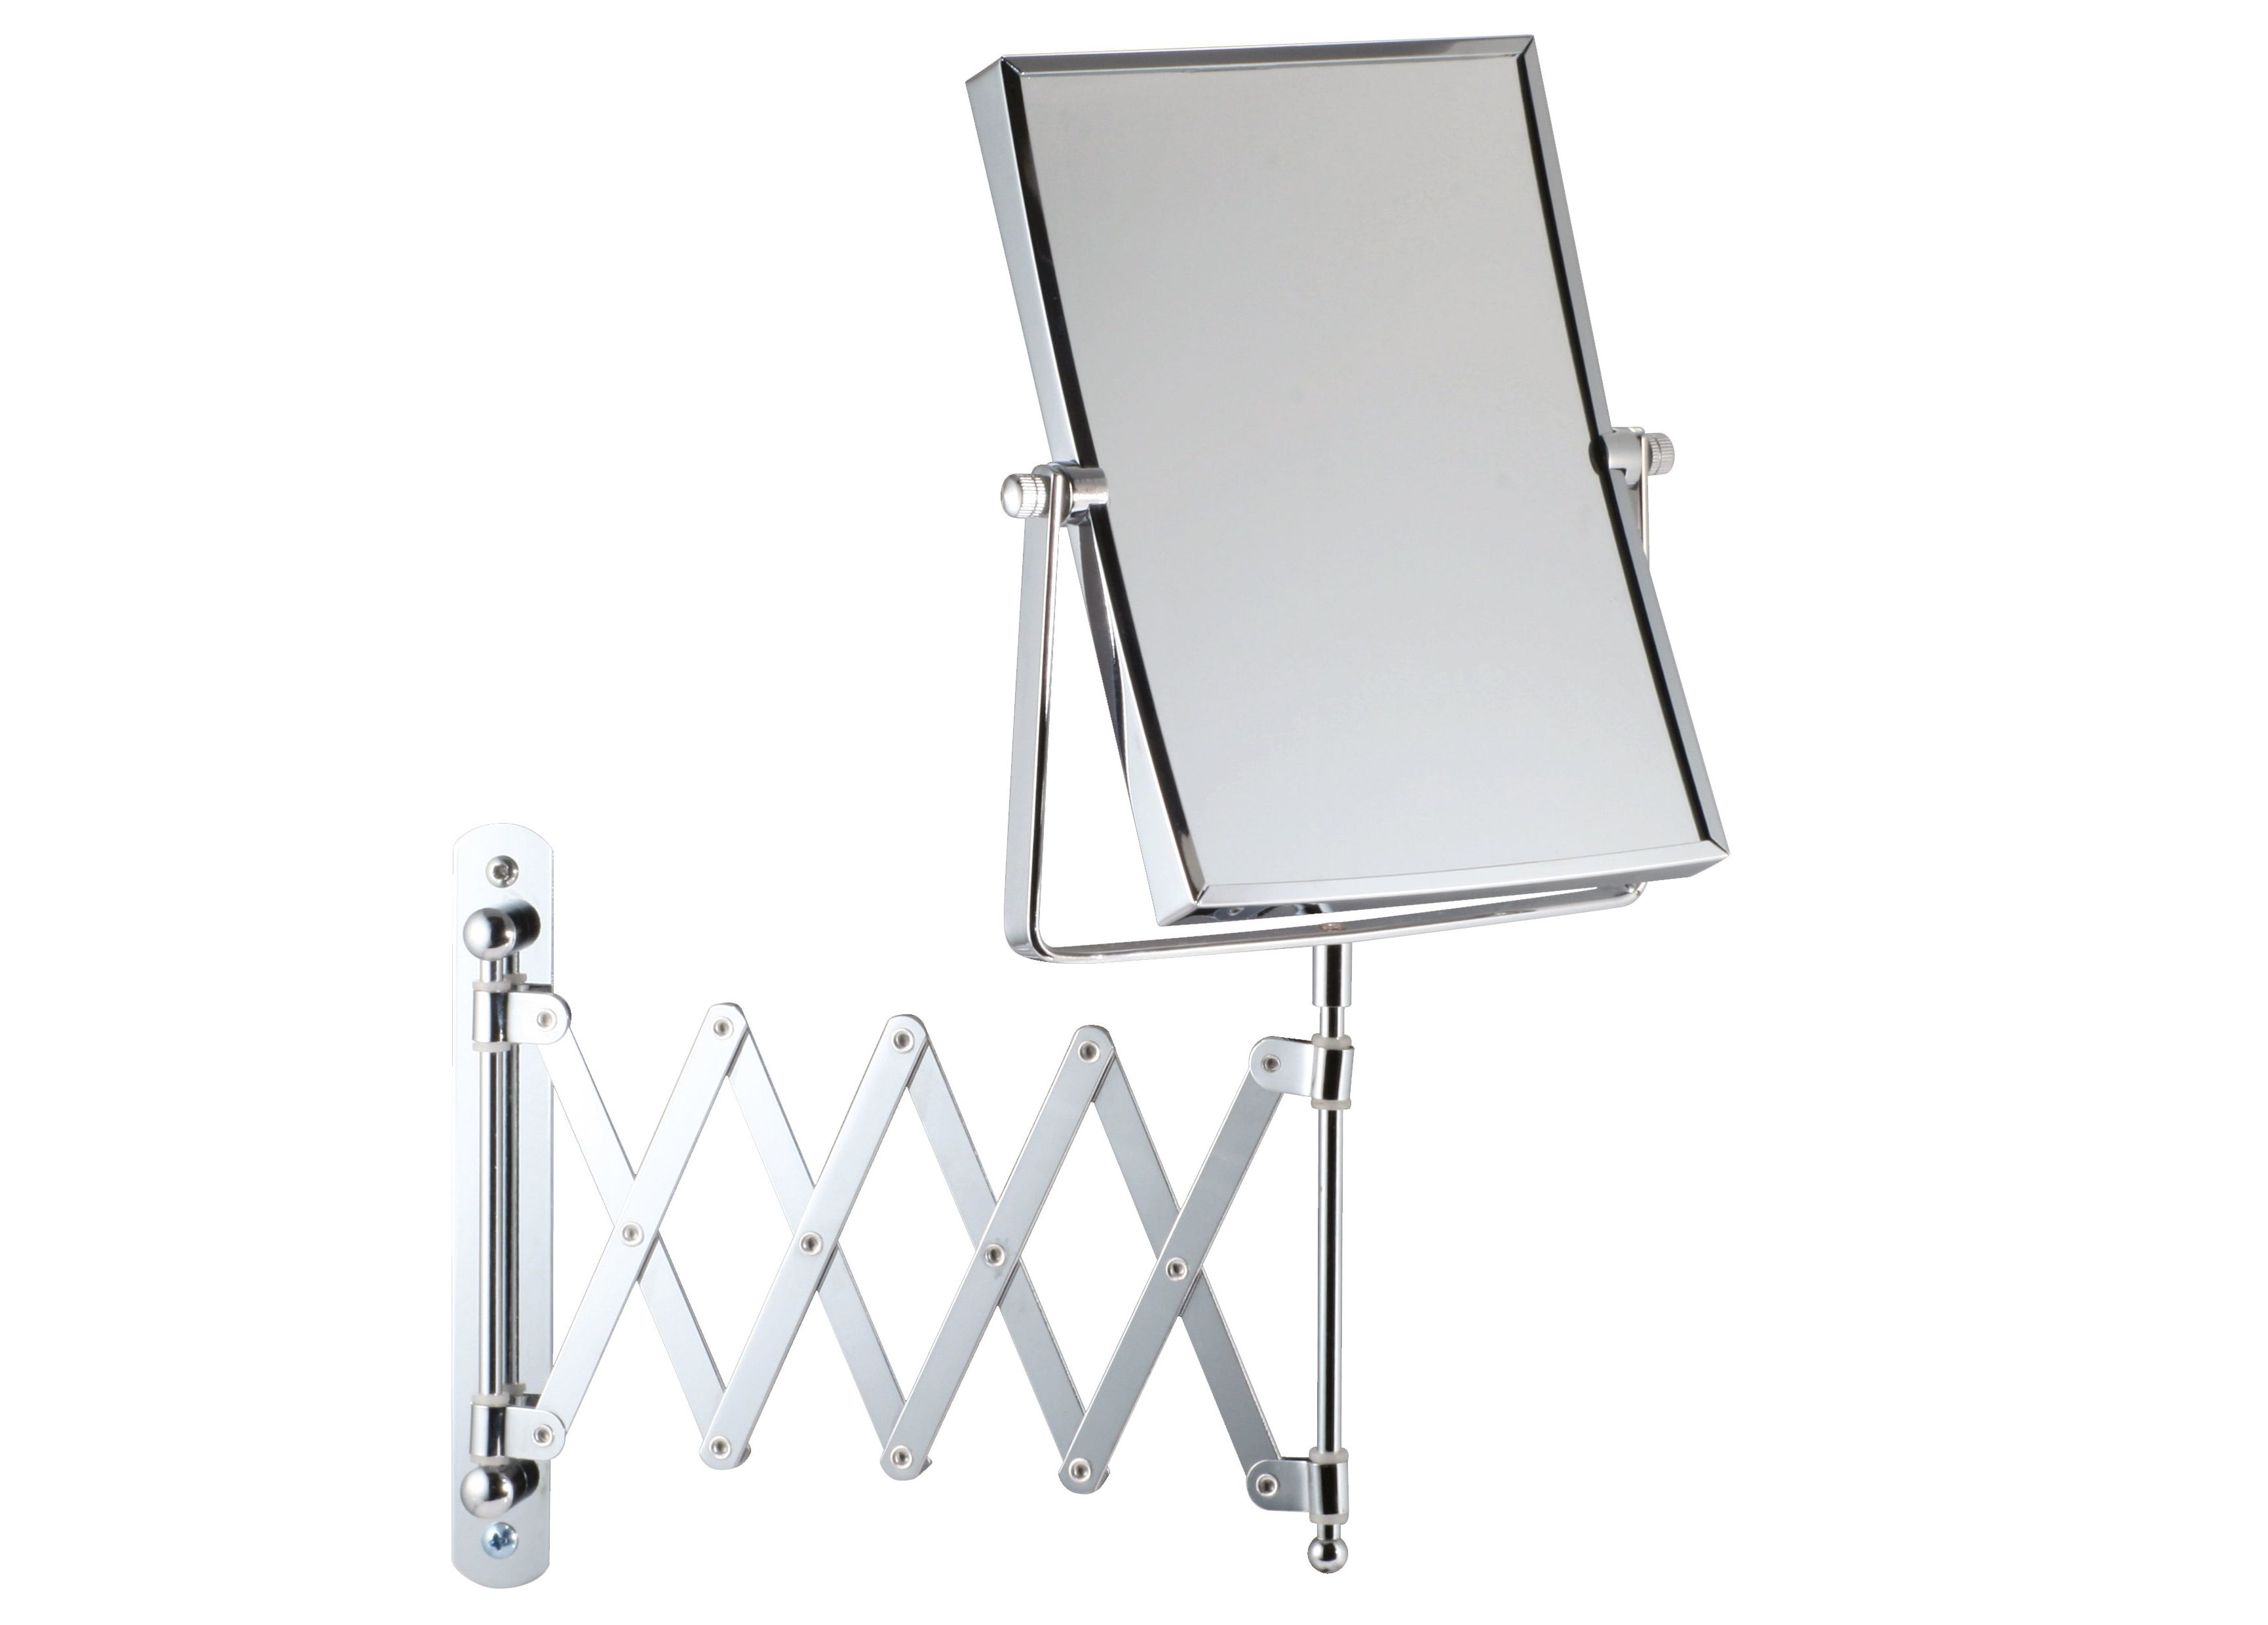 2020 Scarlett Square Extendable Wall Mirror In Extendable Wall Mirrors (View 9 of 20)